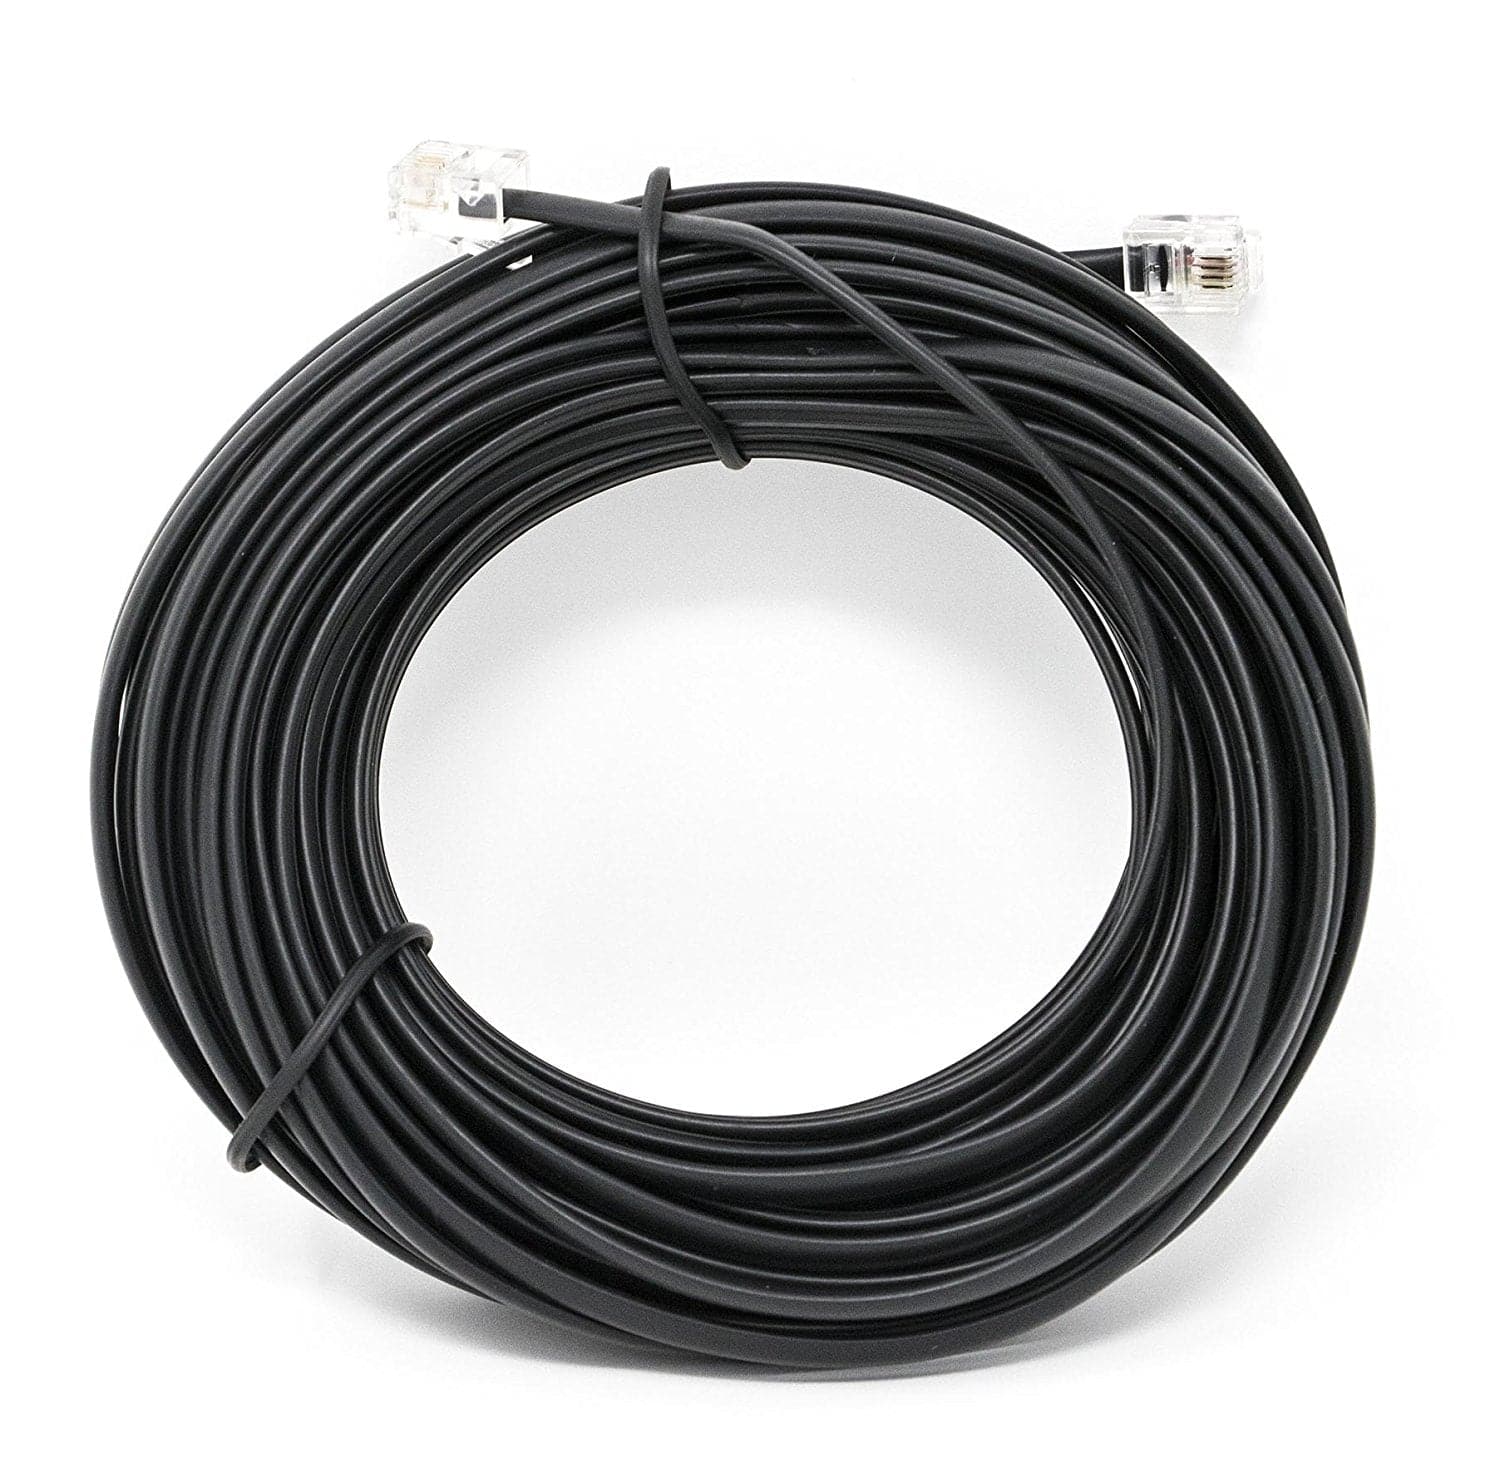 Black 50 FT. Phone Telephone Extension Cord Cable Line Wire - Phone Cable Line Cord - iSoHo Phone Accessories - USA Trading Depot, LLC